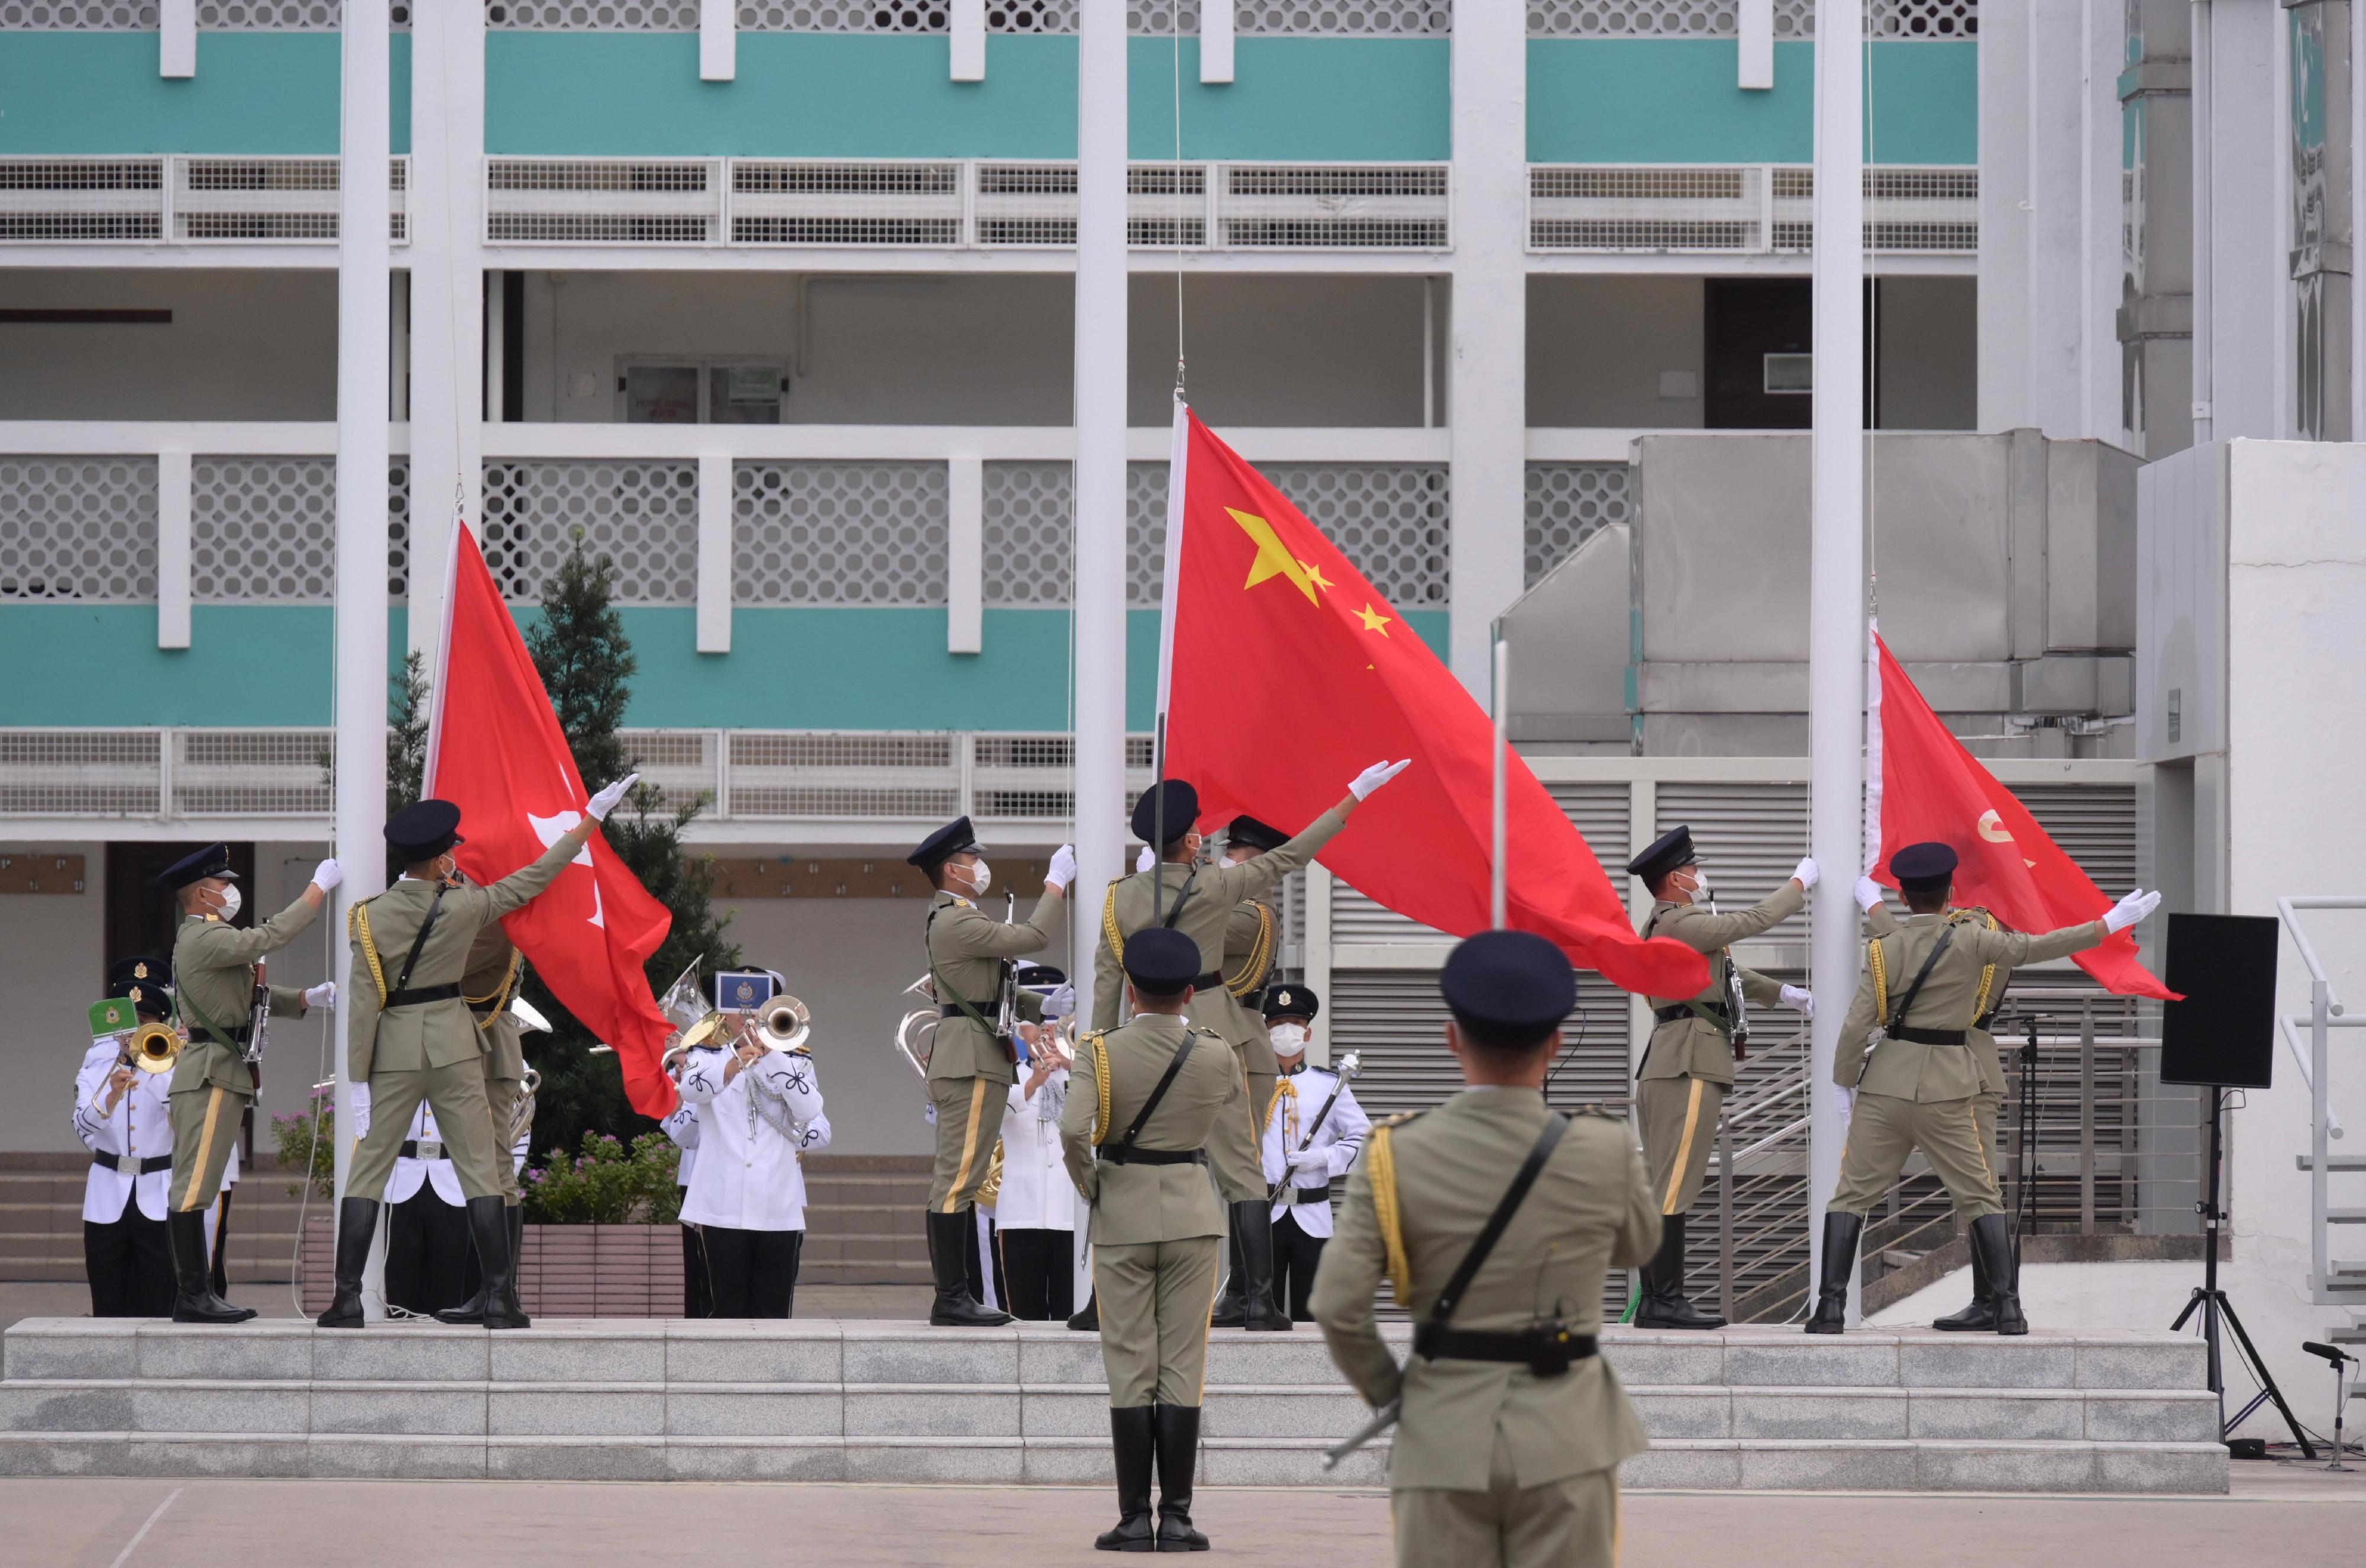 The Security Bureau held the Flag Raising Ceremony to Commemorate 40th Anniversary of Constitution today (December 4).